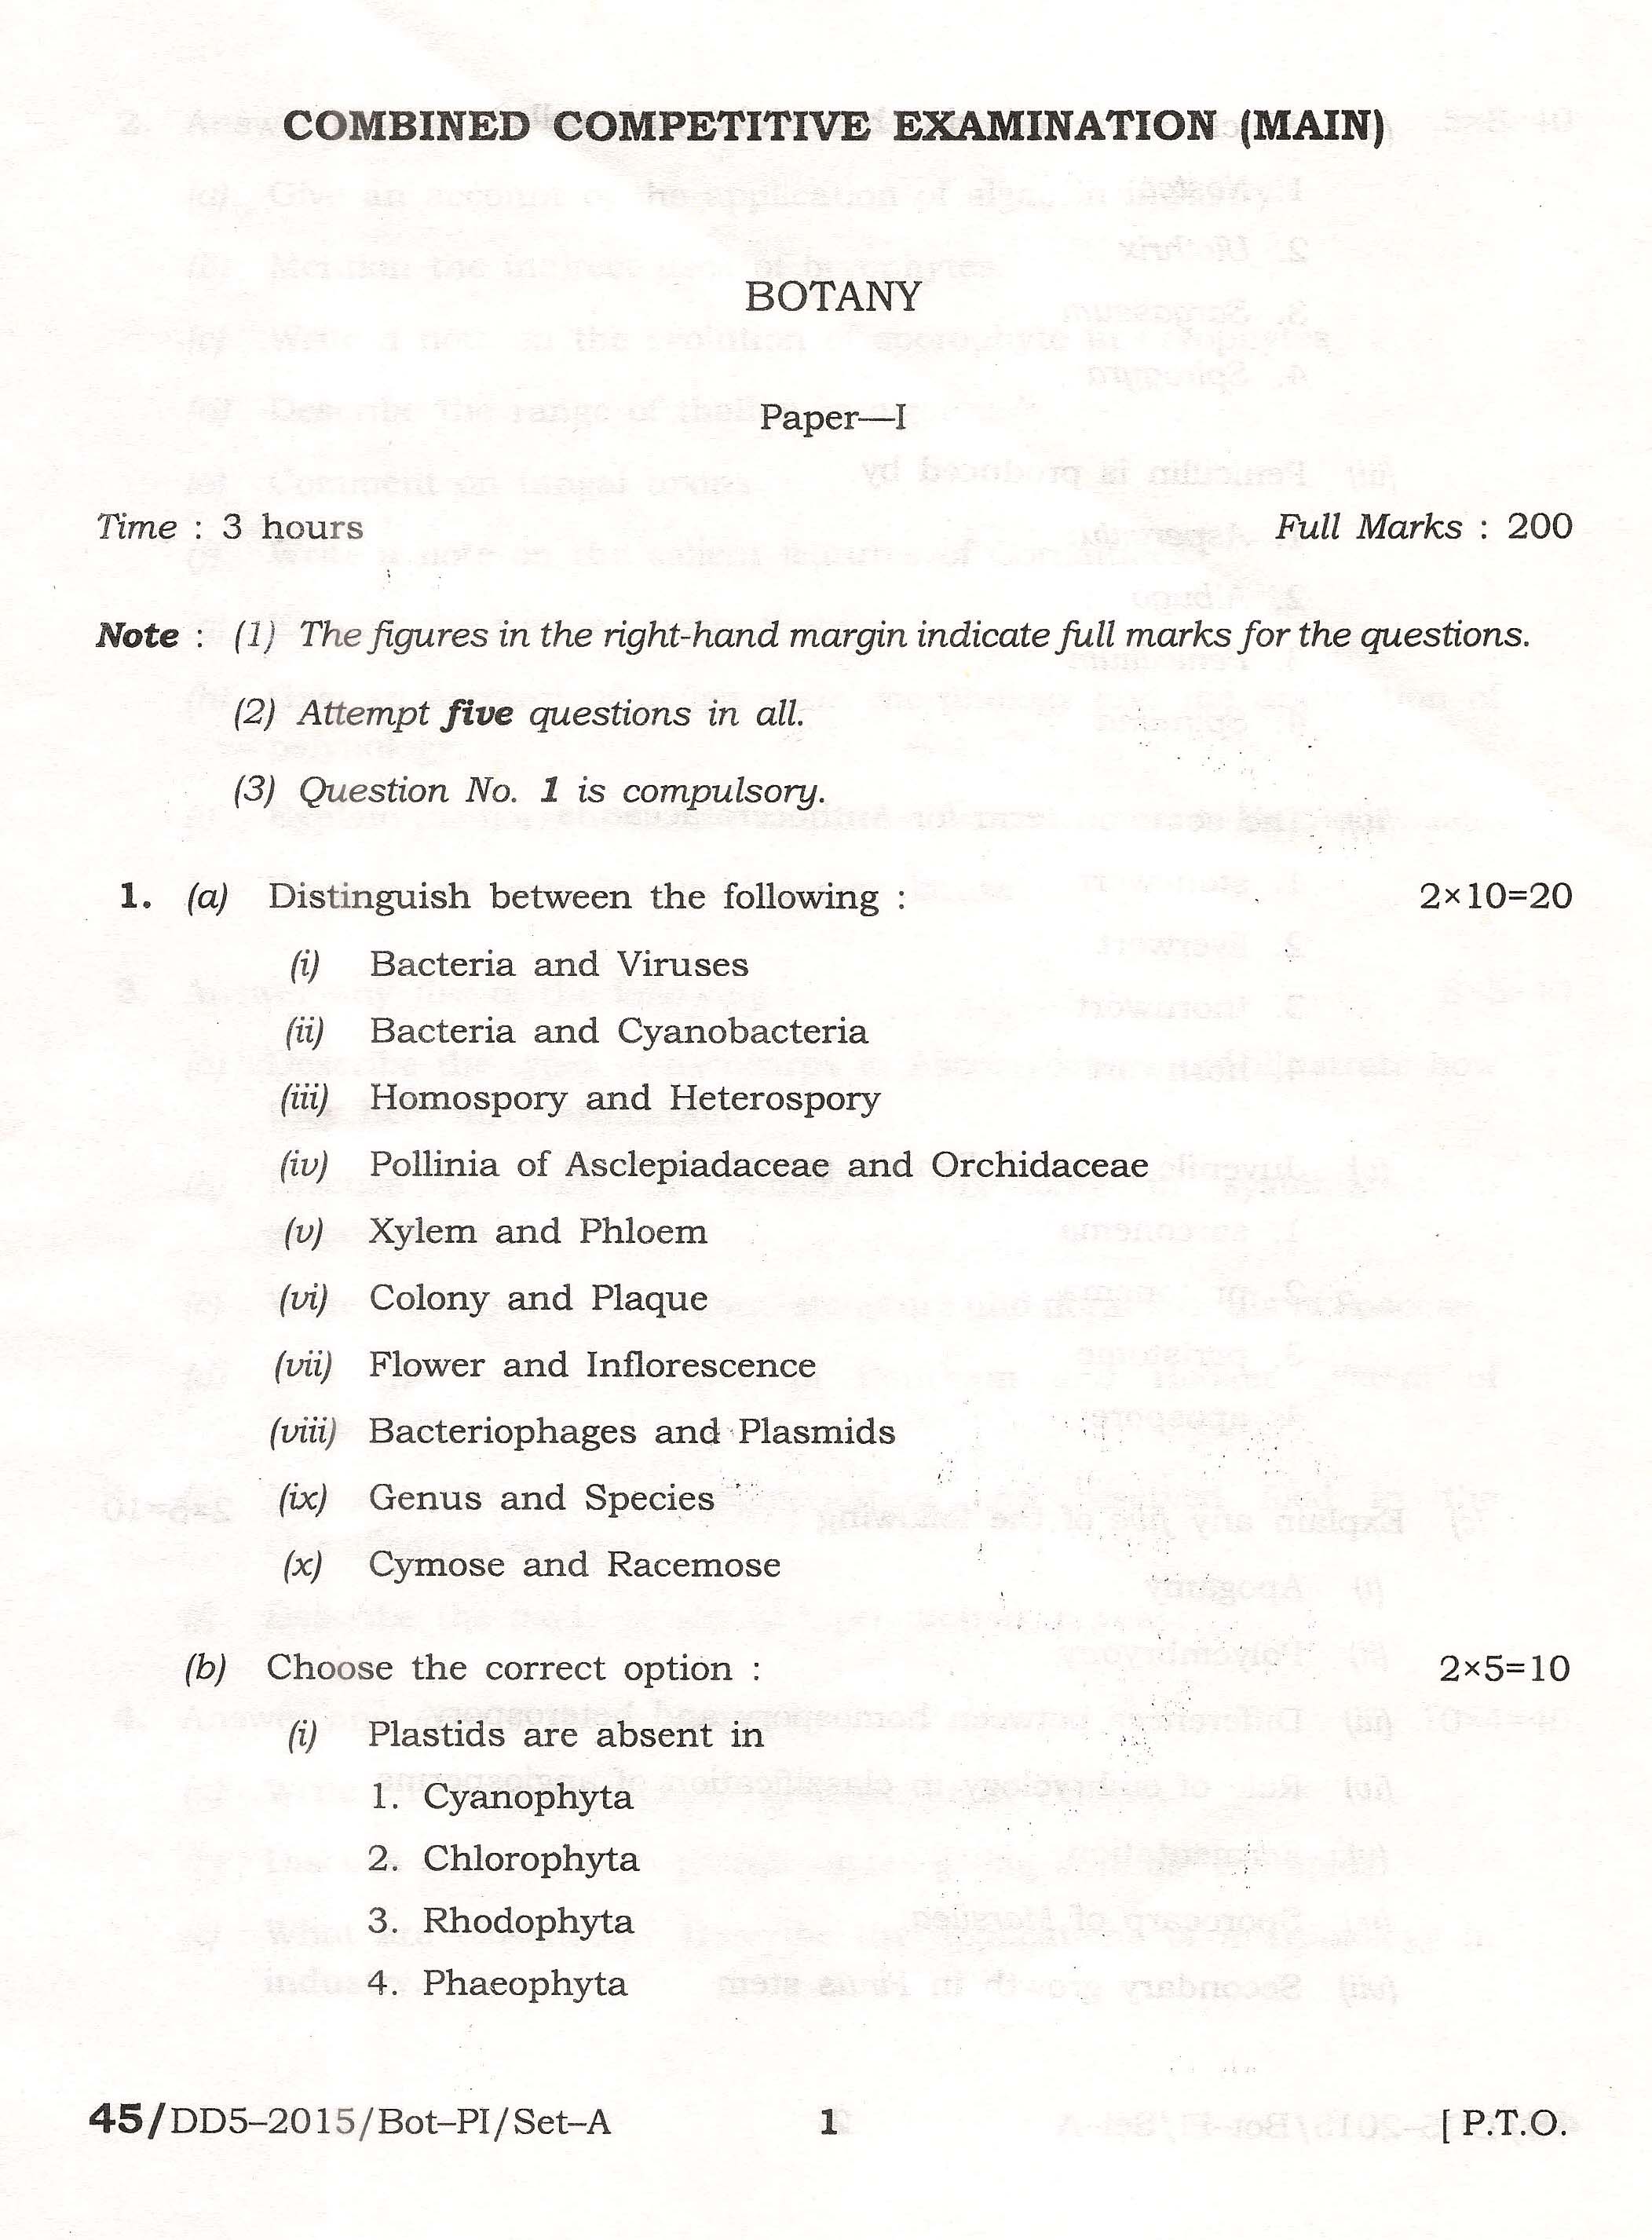 APPSC Combined Competitive Main Exam 2015 Botany Paper I 1